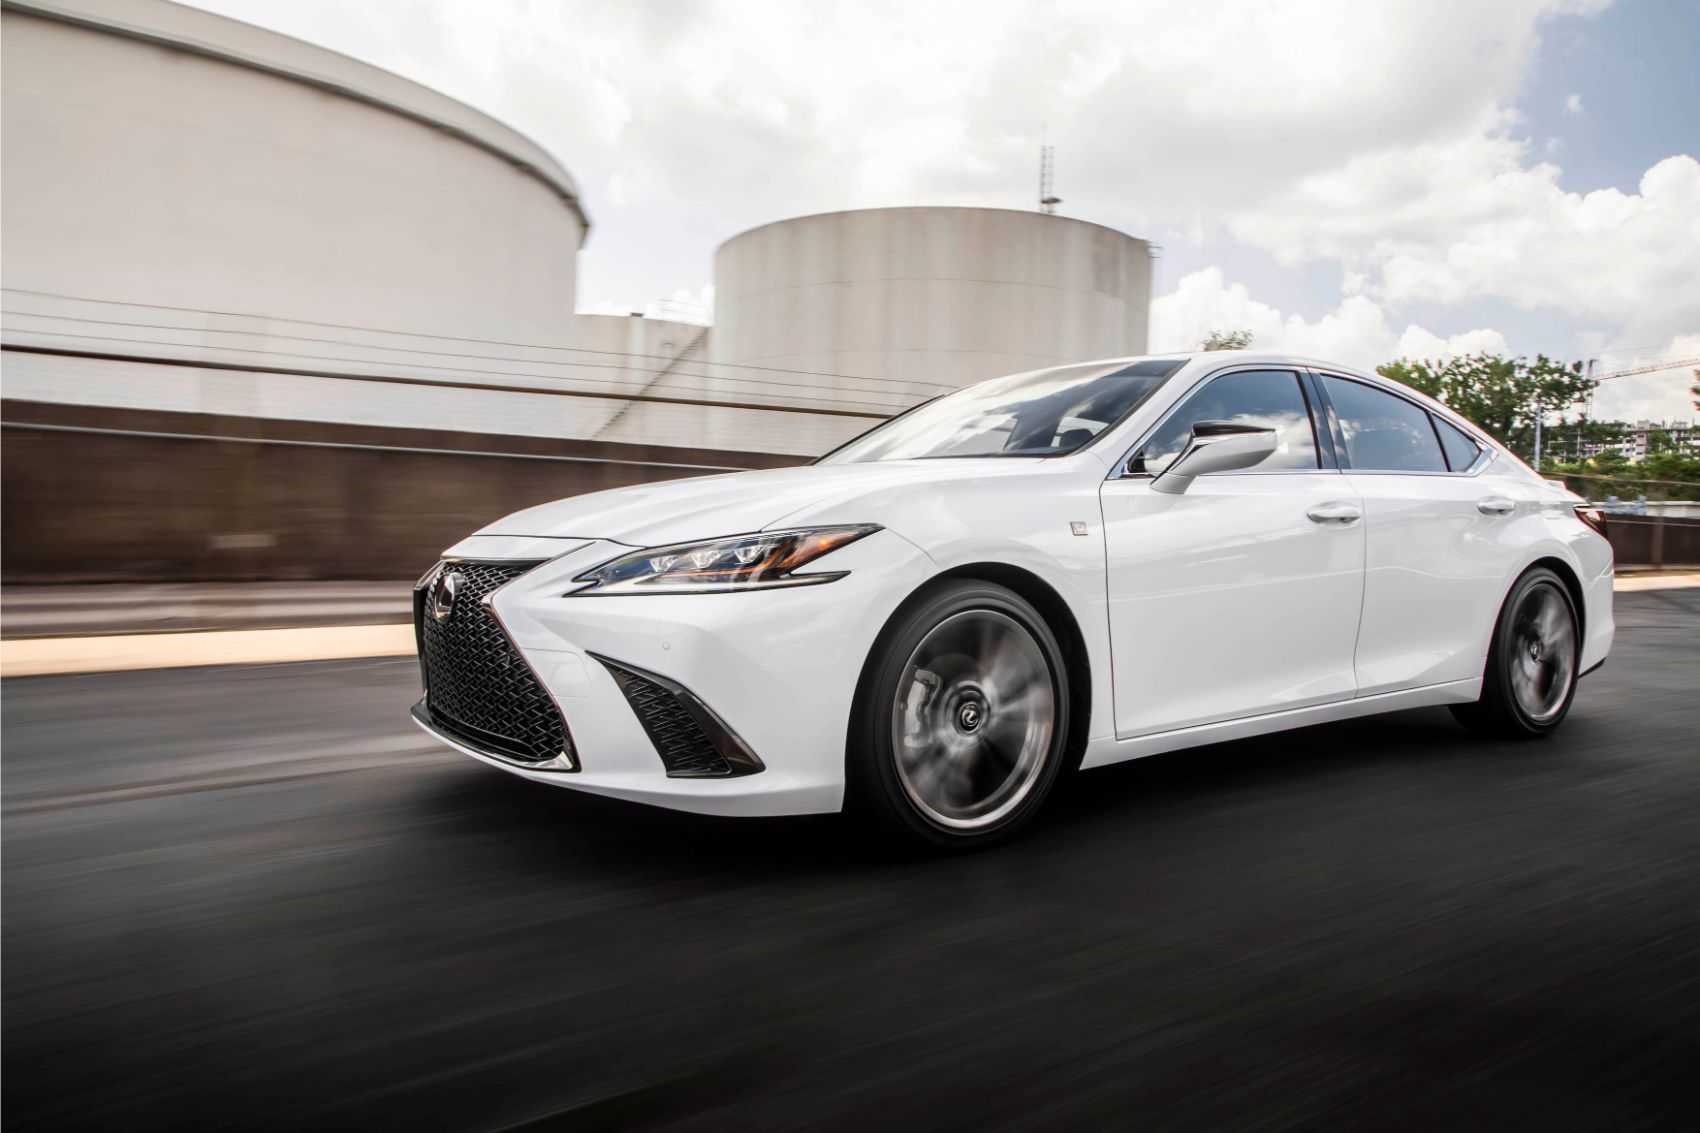 2019 Lexus ES 350 F Sport Review: Well-Balanced For The Daily Drive